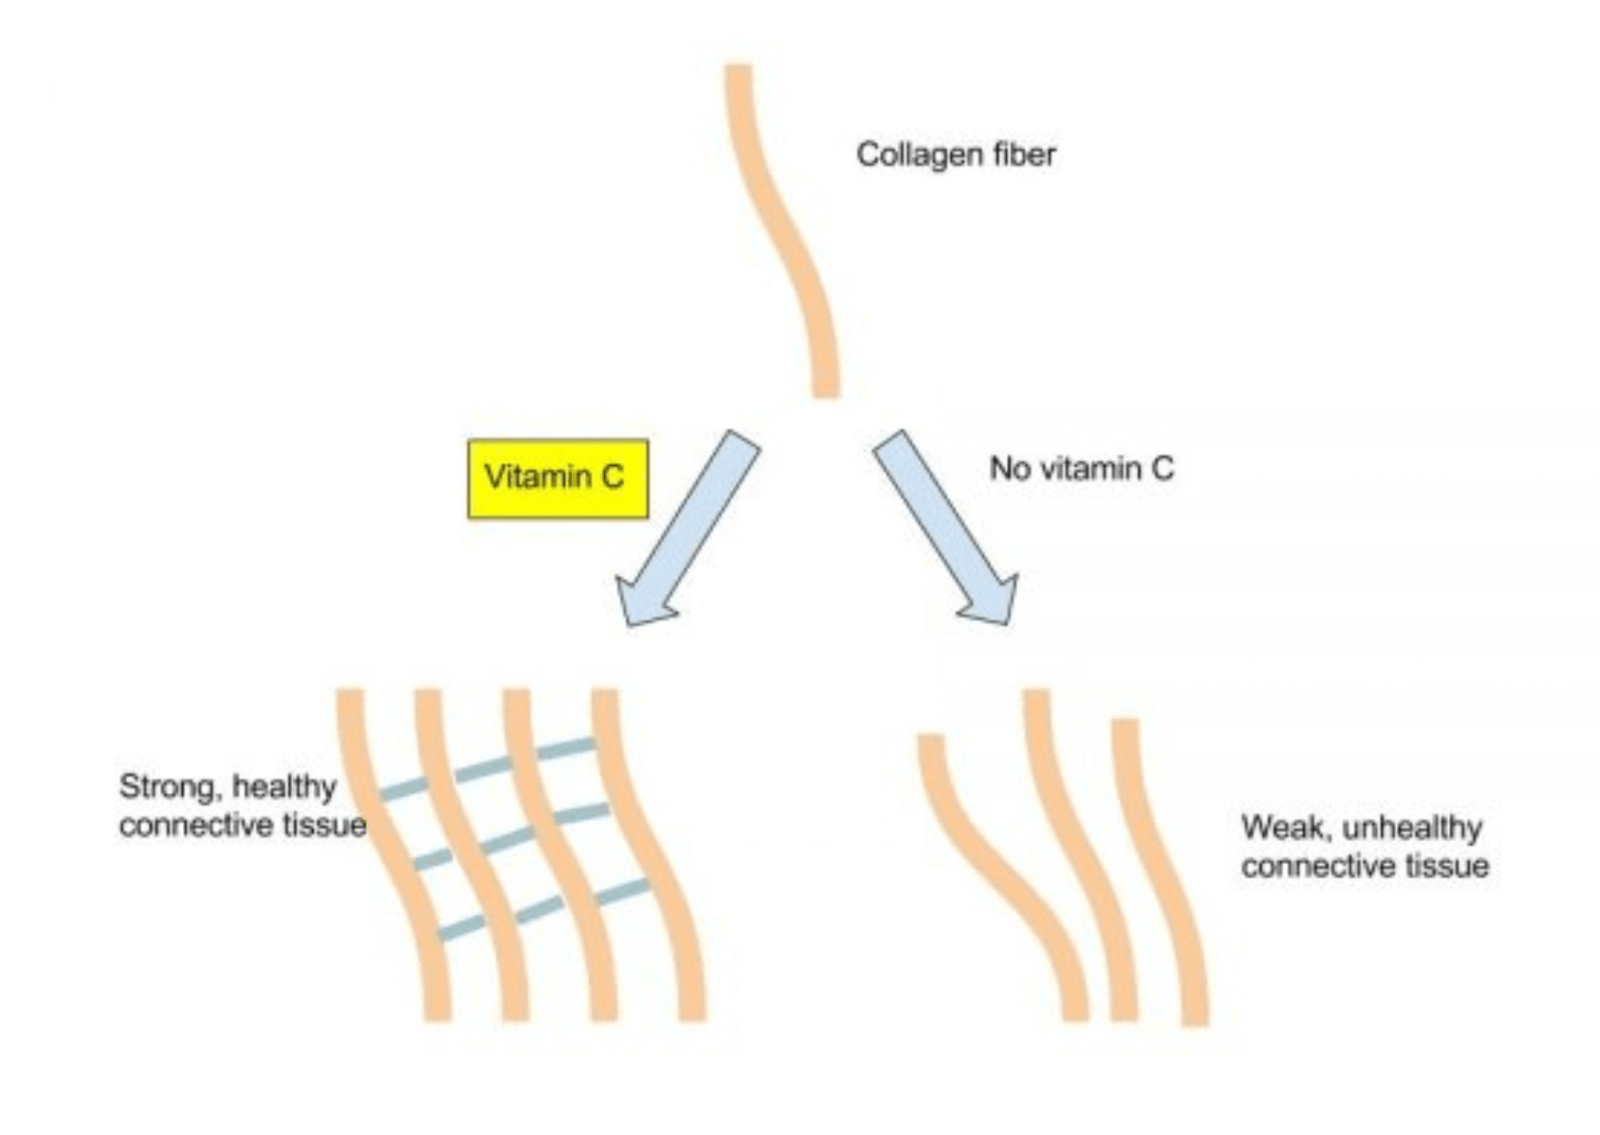 Role of vitamin C in collagen synthesis